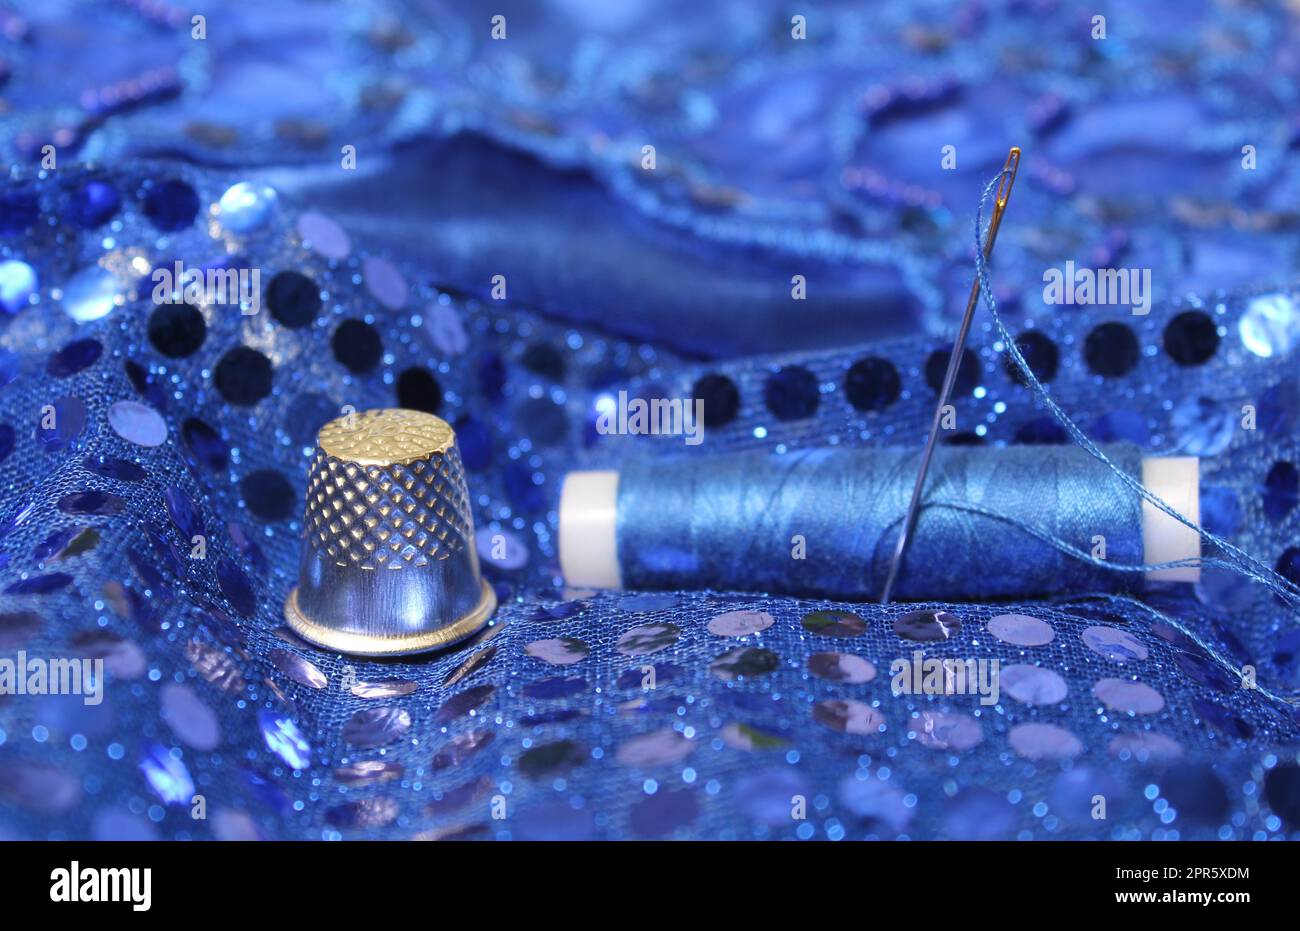 Blue Thread with needle and thimble on blue prom dress Stock Photo